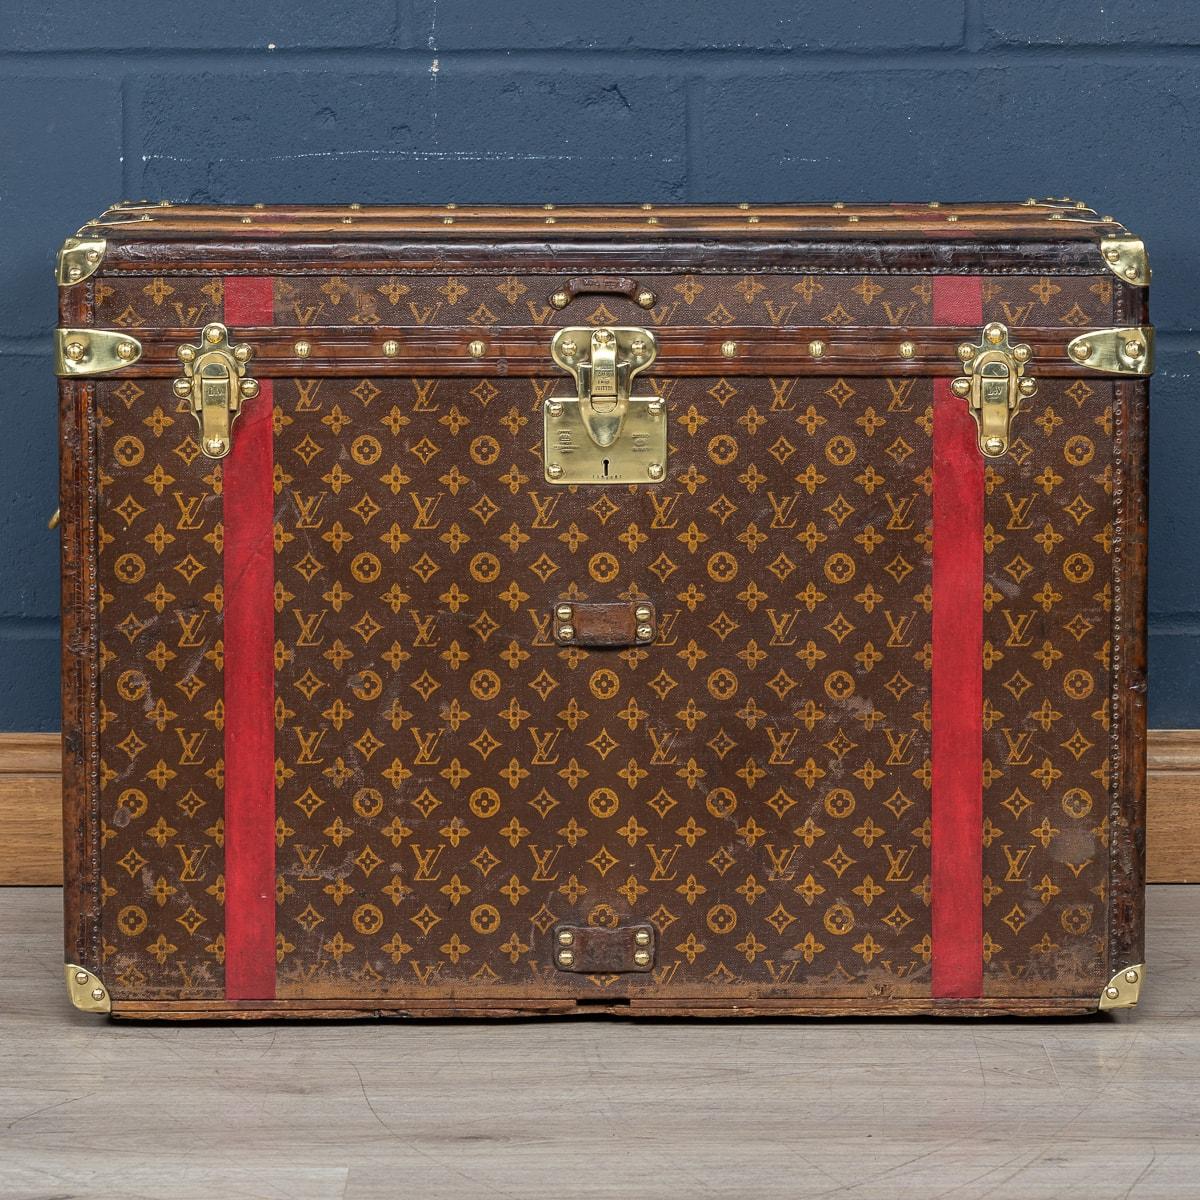 Around the turn of the 19th and 20th century Louis Vuitton had established himself as a market leader in trunk making and needed to set his now famous brand apart from the imitators and competitors. They decided to come up with a logo, a monogram,